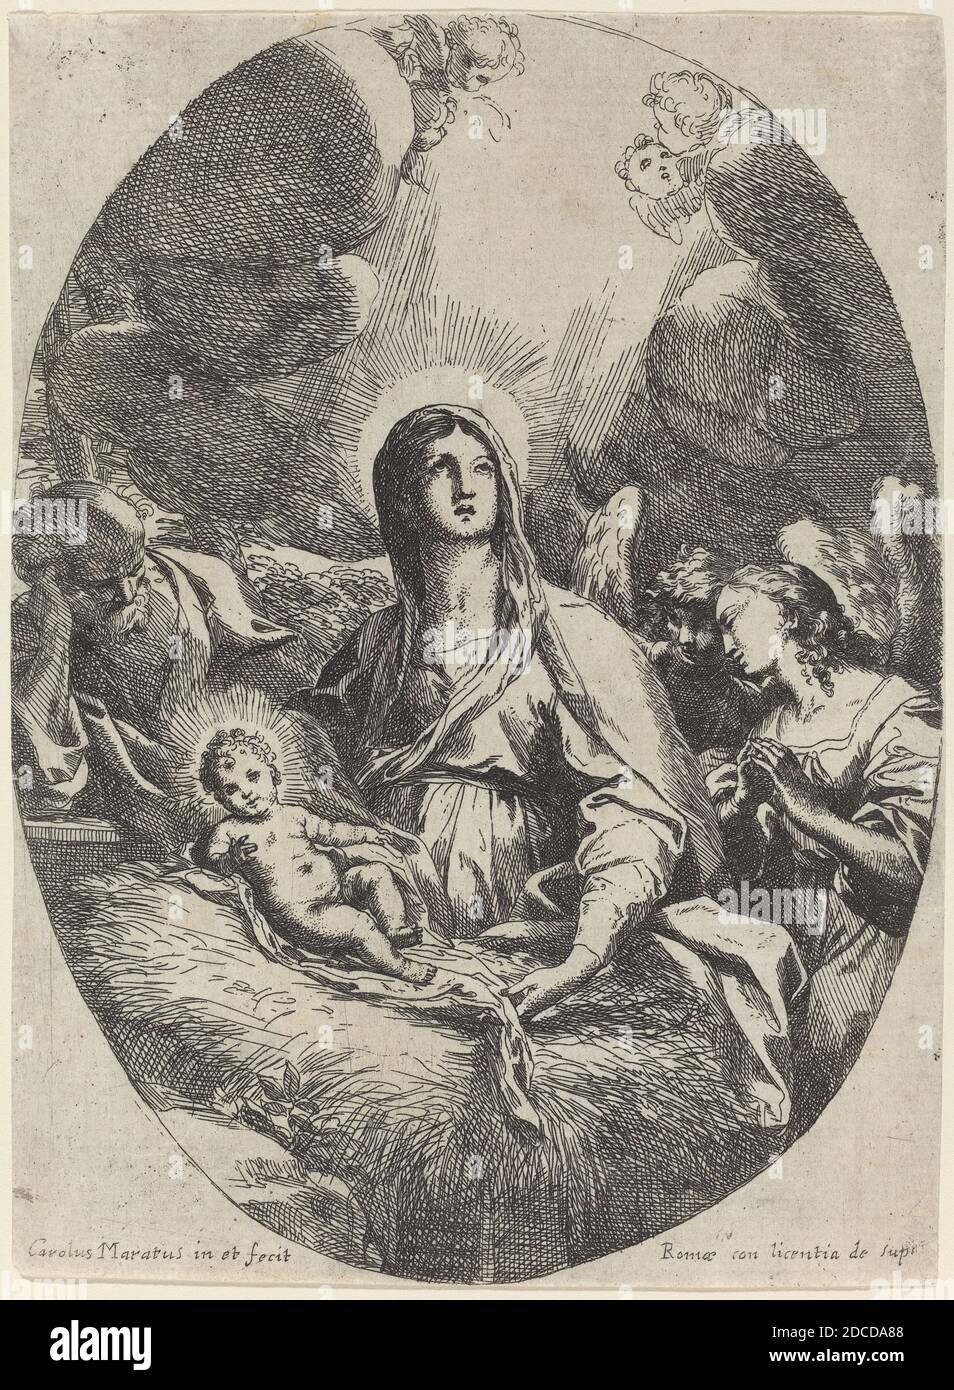 Carlo Maratta, (artist), Italian, 1625 - 1713, The Holy Family with Angels, etching Stock Photo